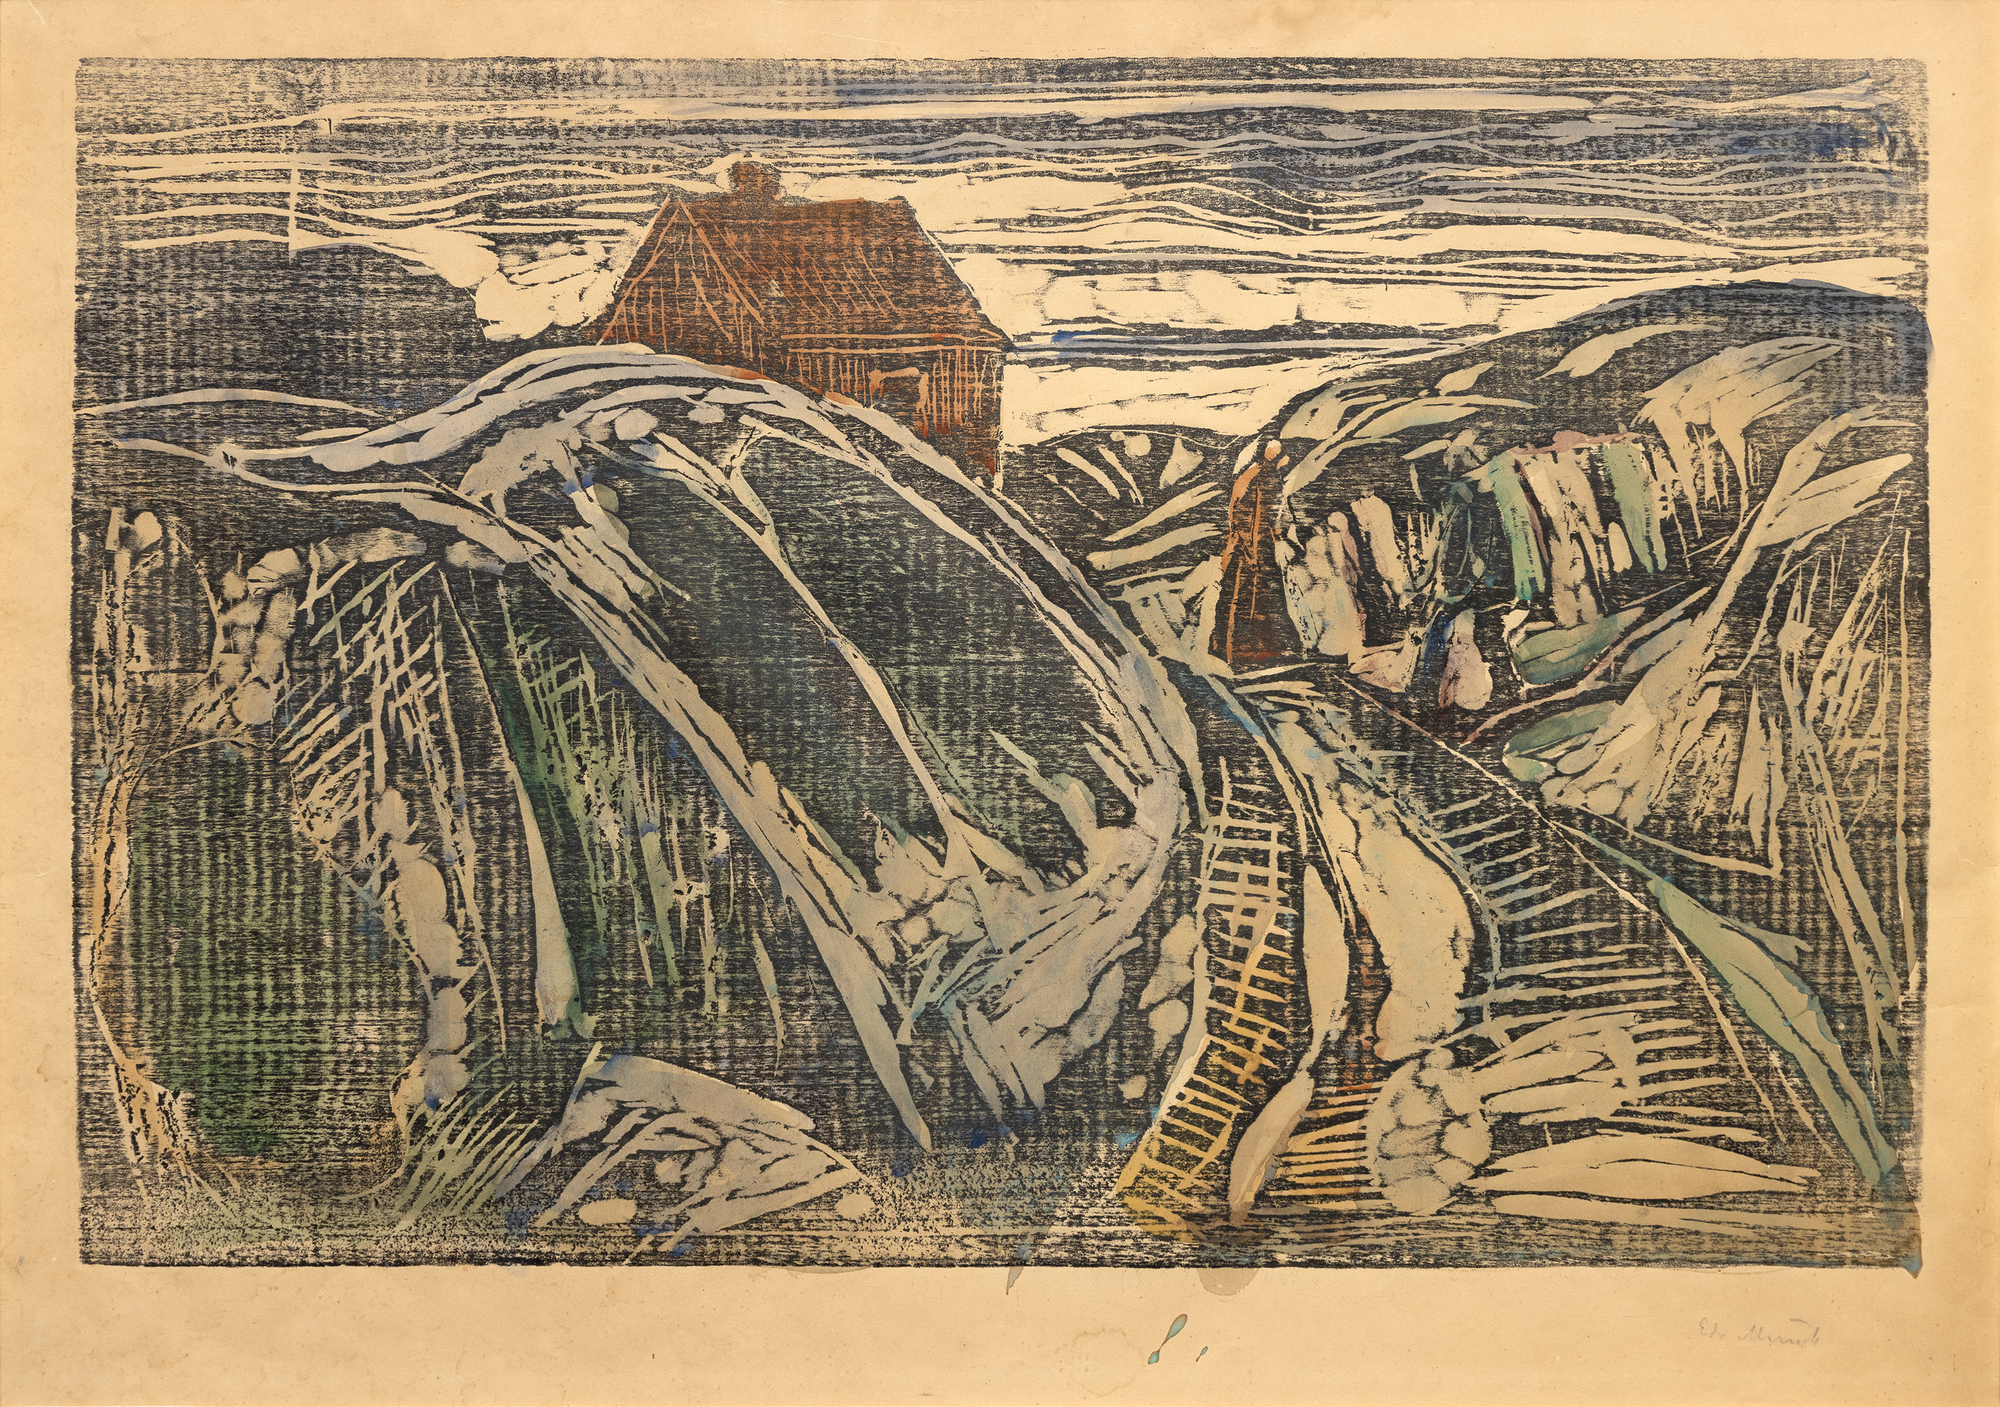 Experimental and highly sophisticated, Munch's innovative "jigsaw technique" involved cutting the woodblock into separate pieces and inking and printing each individually before reassembling them to create the final image. The process produced a variety of colors, unique prints within the same edition, and a wide range of emotions and moods. Richly orchestrated, the undulating forms of House on the Coast I are built through layers of color and texture featuring multiple planes, each contributing to its depth and spatial complexity. The carving and gouging of woodcuts, ideally suited for expressing Edvard Munch's often brutal working mentality, pushed the boundaries of traditional methods and reinforced his commitment to exploring emotional and psychological depth in his art.